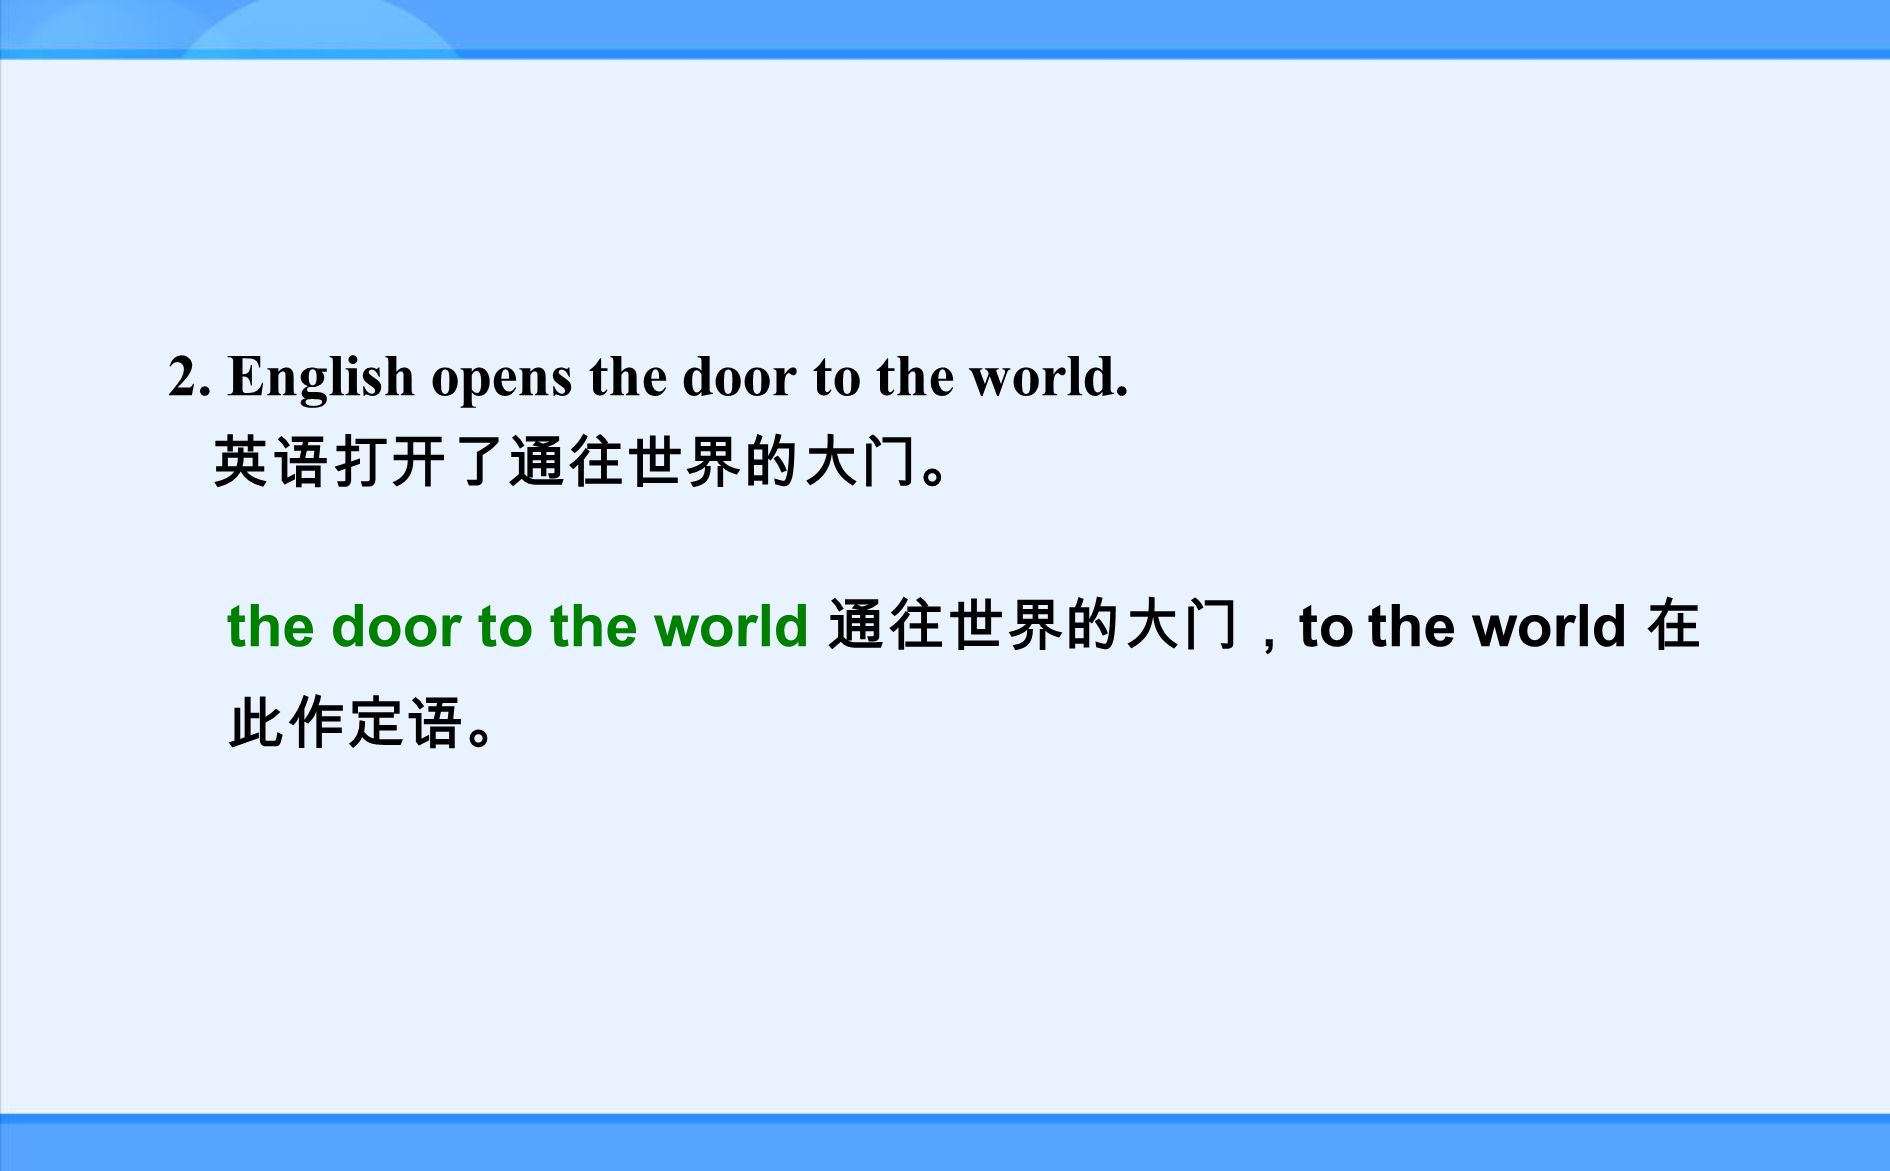 2. English opens the door to the world.